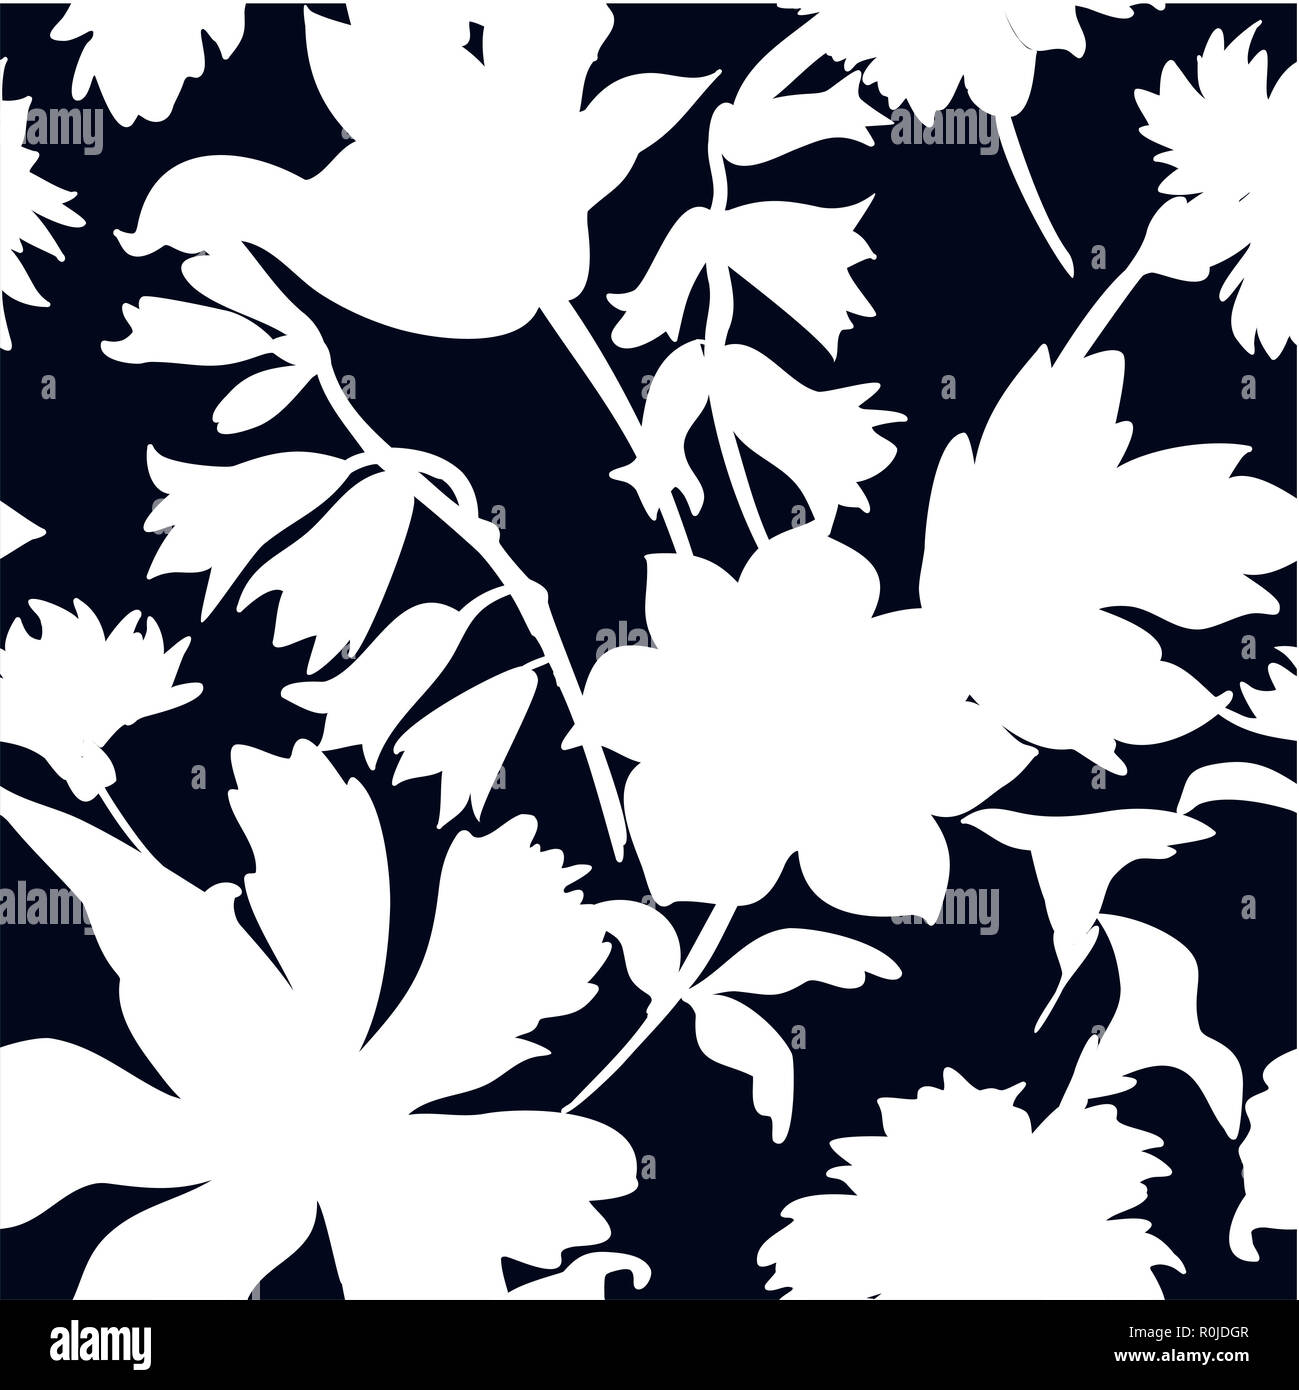 Silhouettes of different flowers and leaves hand drawn.Vector floral seamless background pattern for wallpaper, textile prints, fabric. Stock Photo